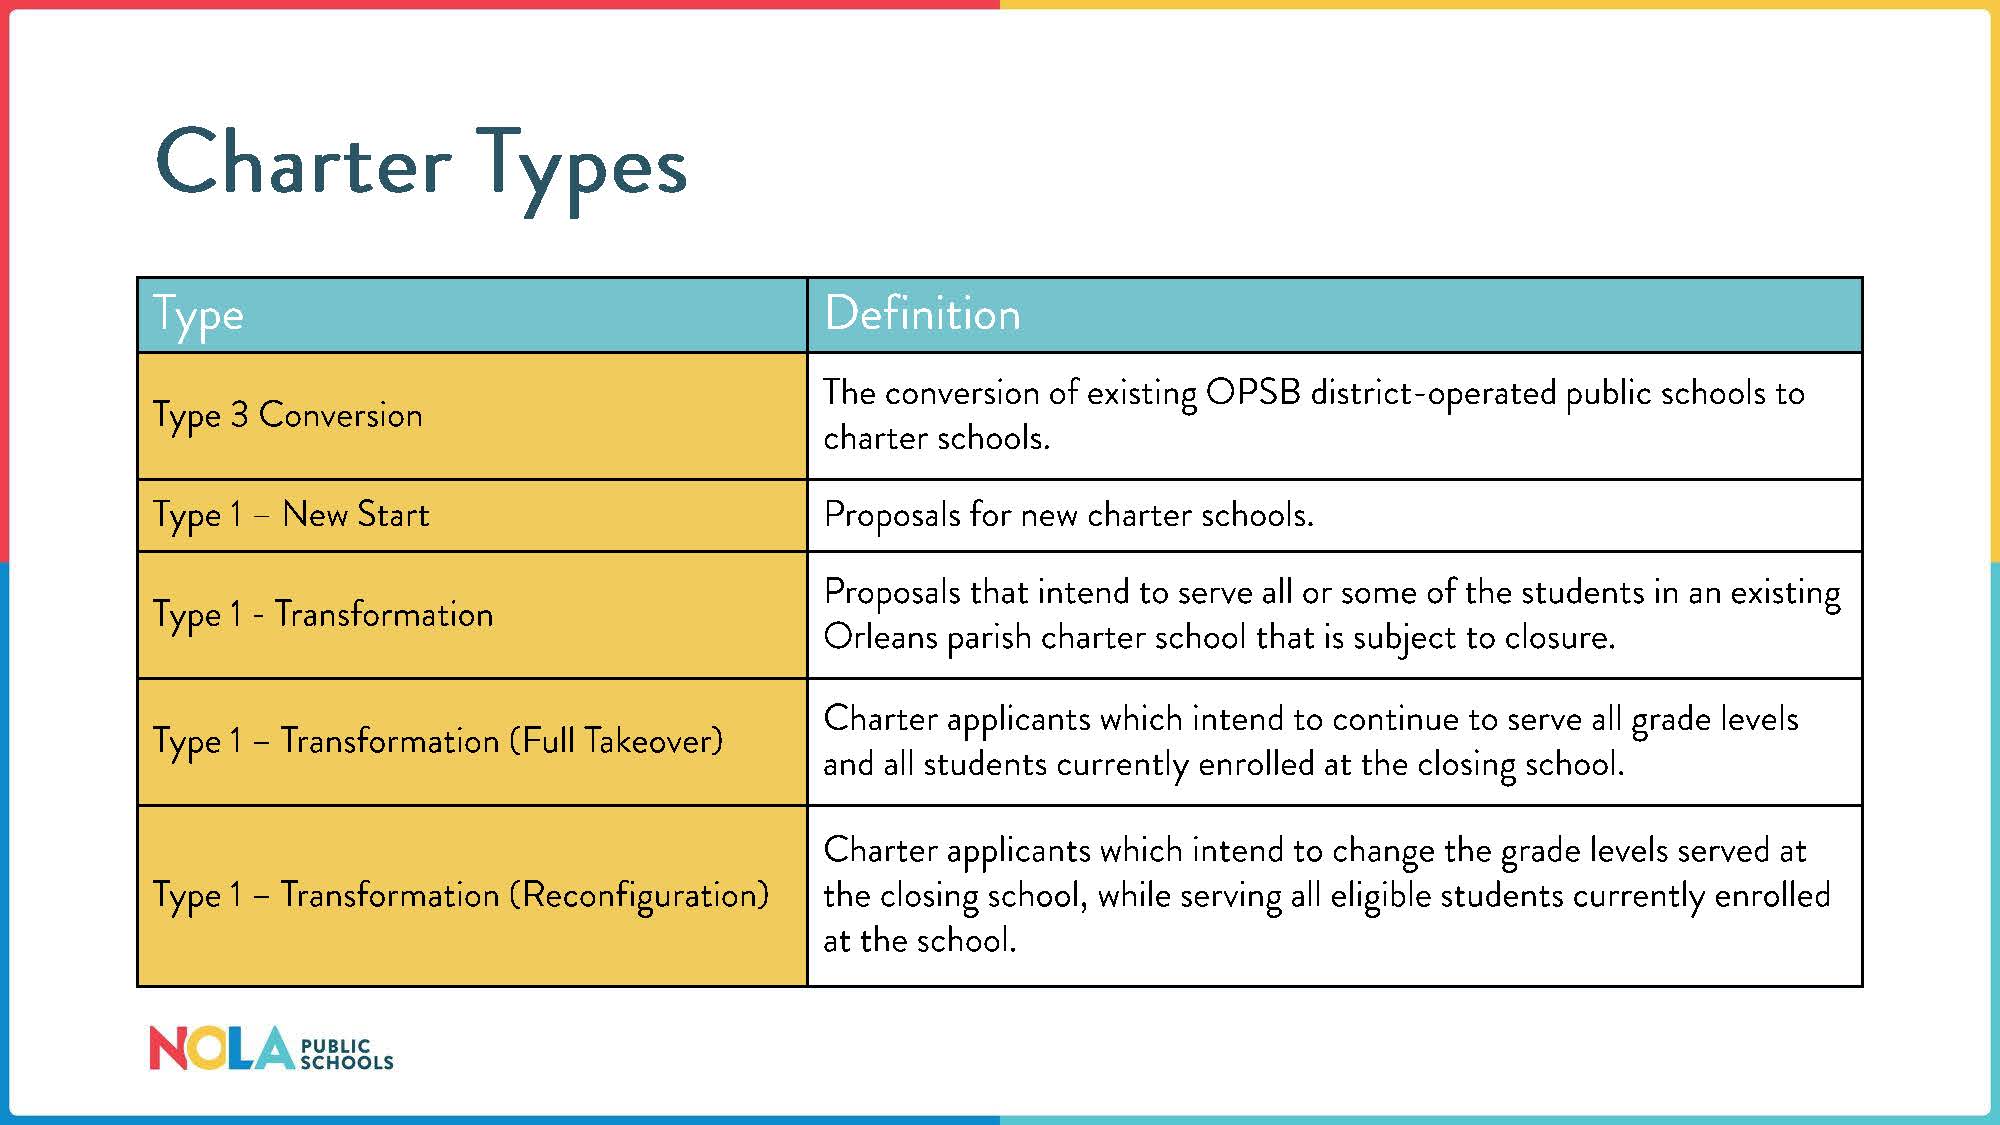 Charter Types, including Type 3 Conversion, Type 1 New Start, Type 1 Transformation, Type 1 Transformation (Full Takeover), Type 1 Transformation (Reconfiguration)